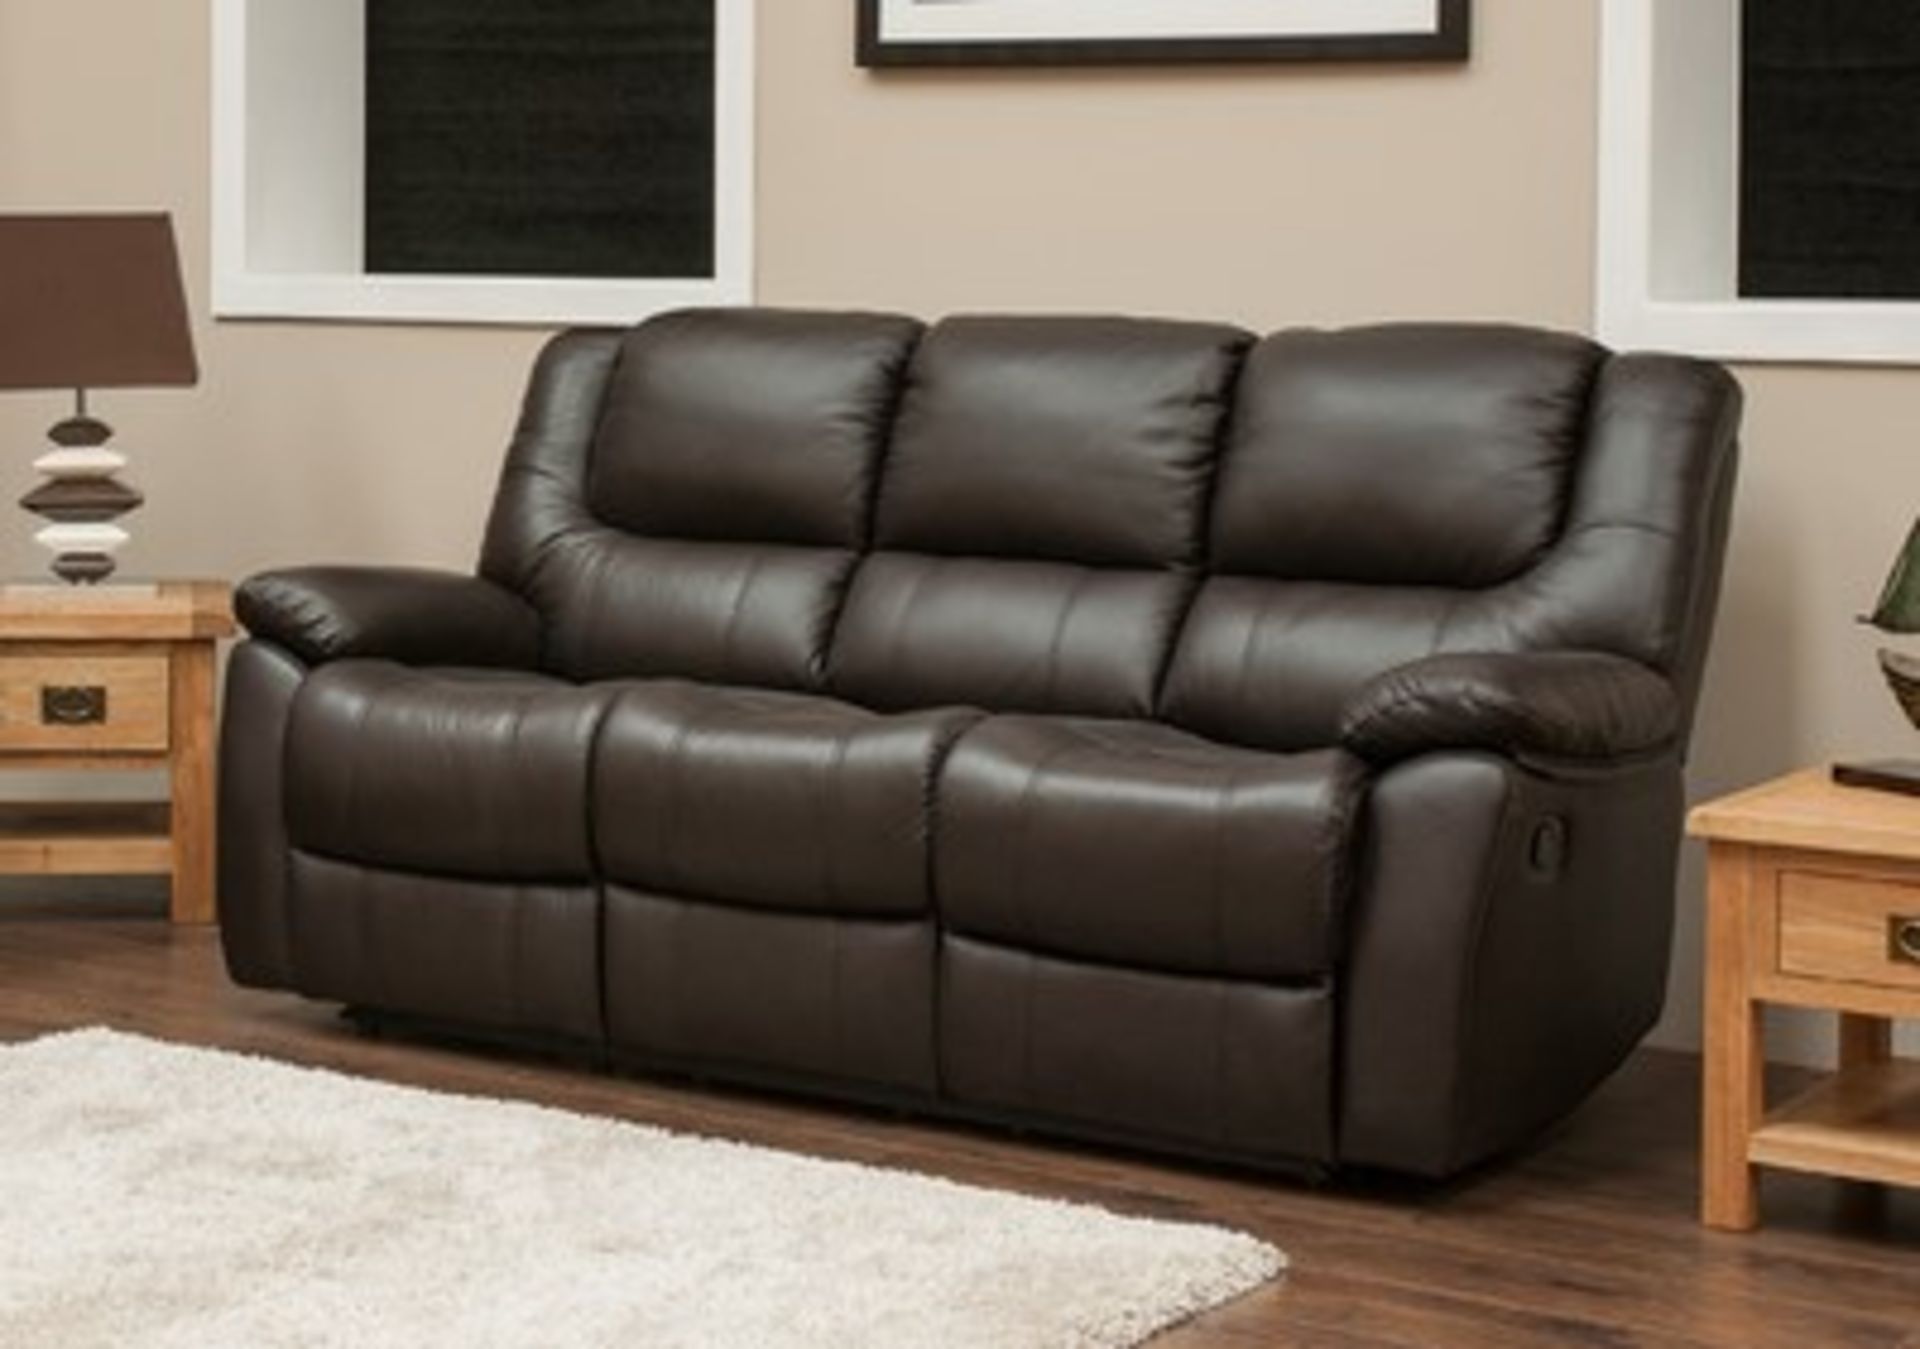 Brand new boxed direct from the manufacturers Harvard 3 seater plus 2 seater full top grade